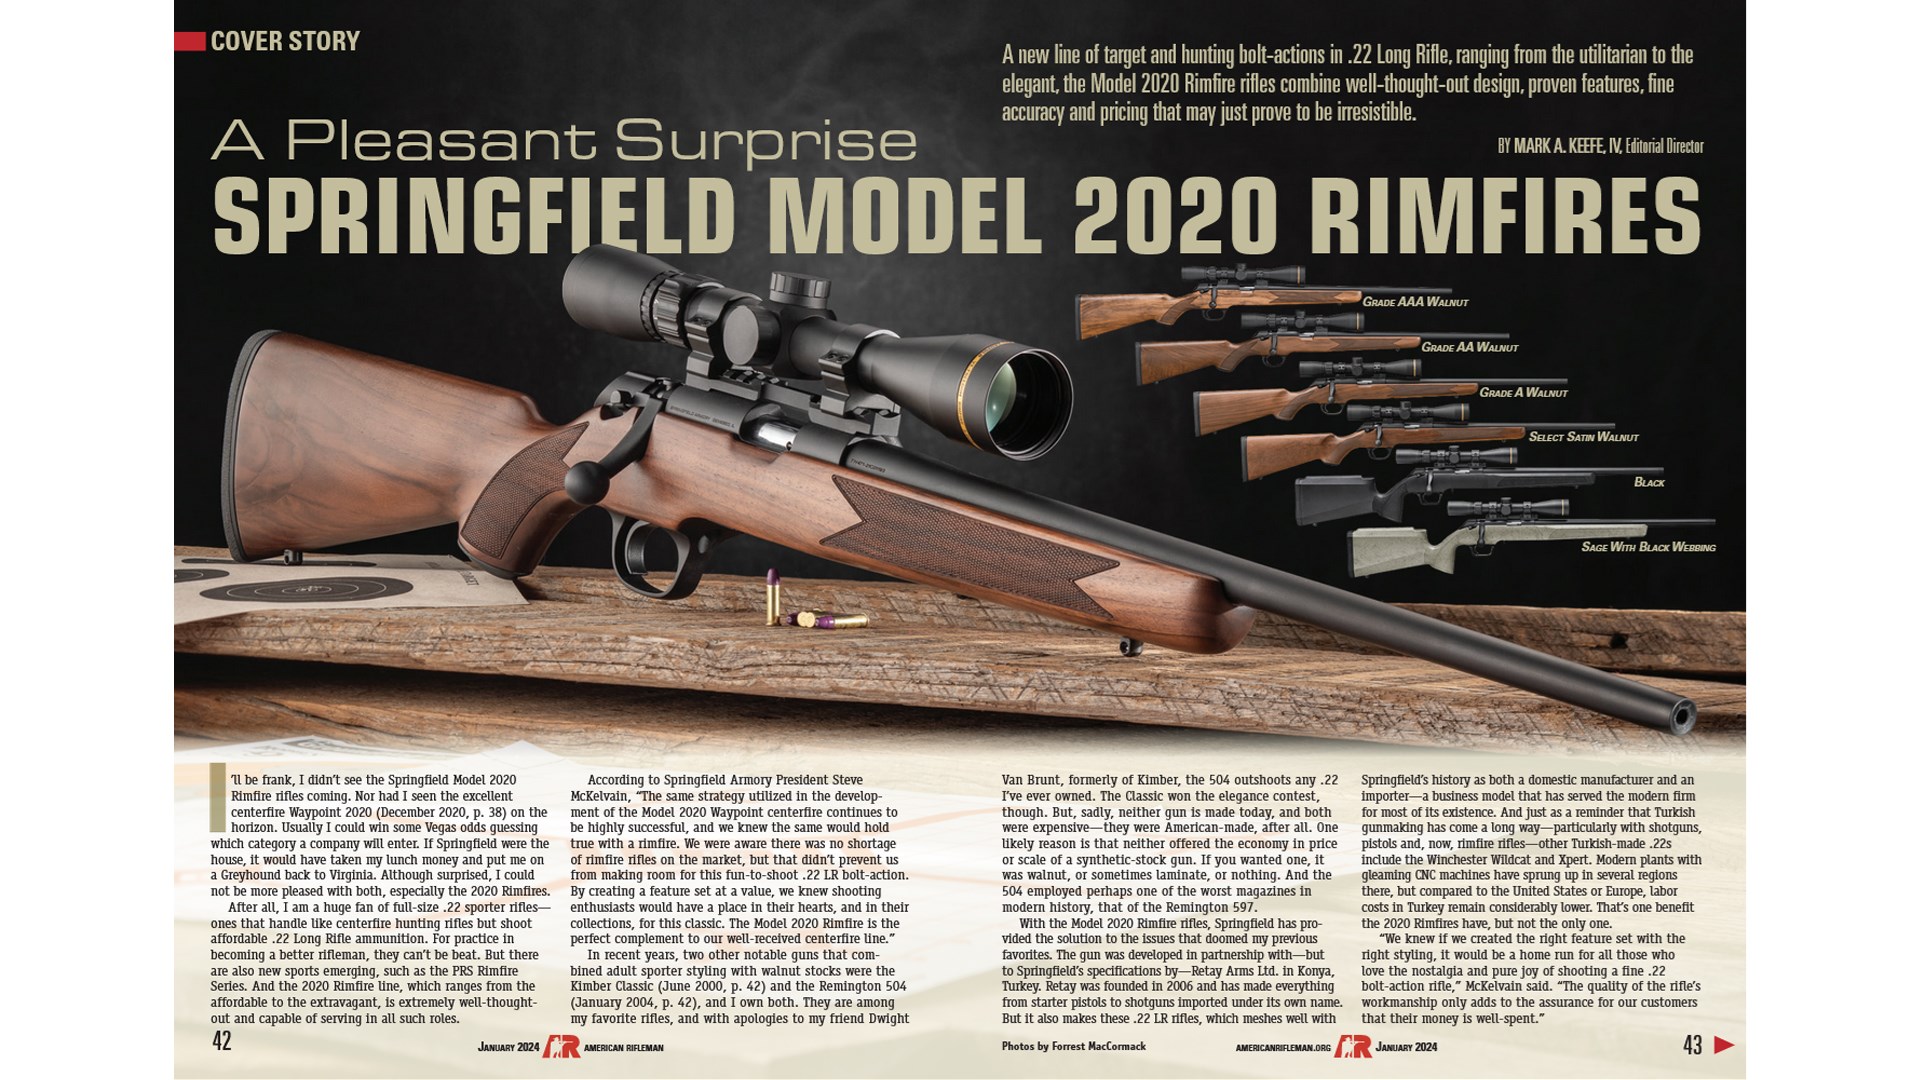 Magazine centerfold featuring Springfield Armory Model 2020 Rimfires bolt-action rifle text on image